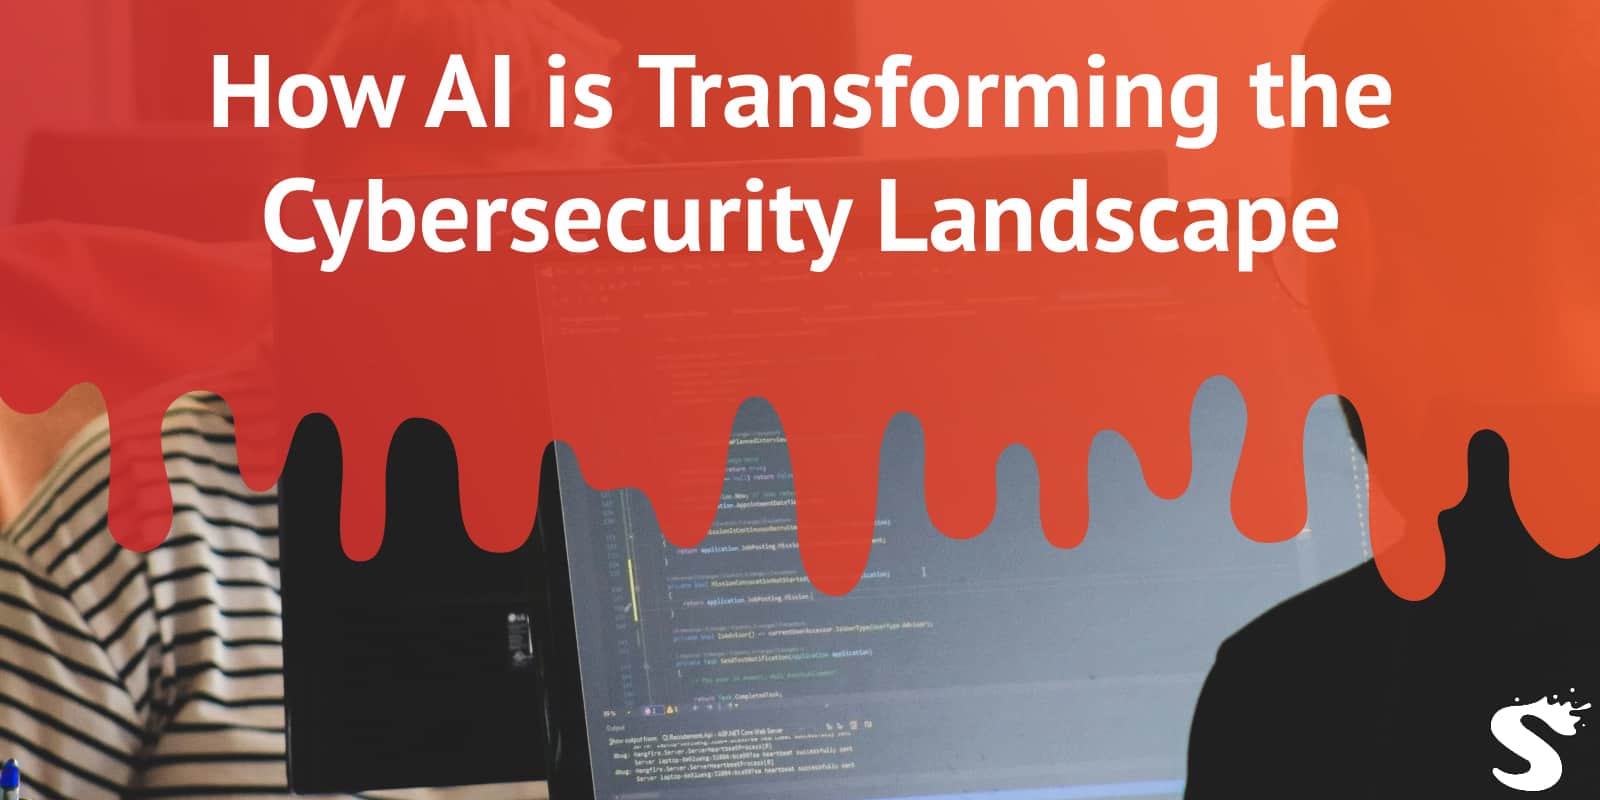 How AI is Transforming the Cybersecurity Landscape